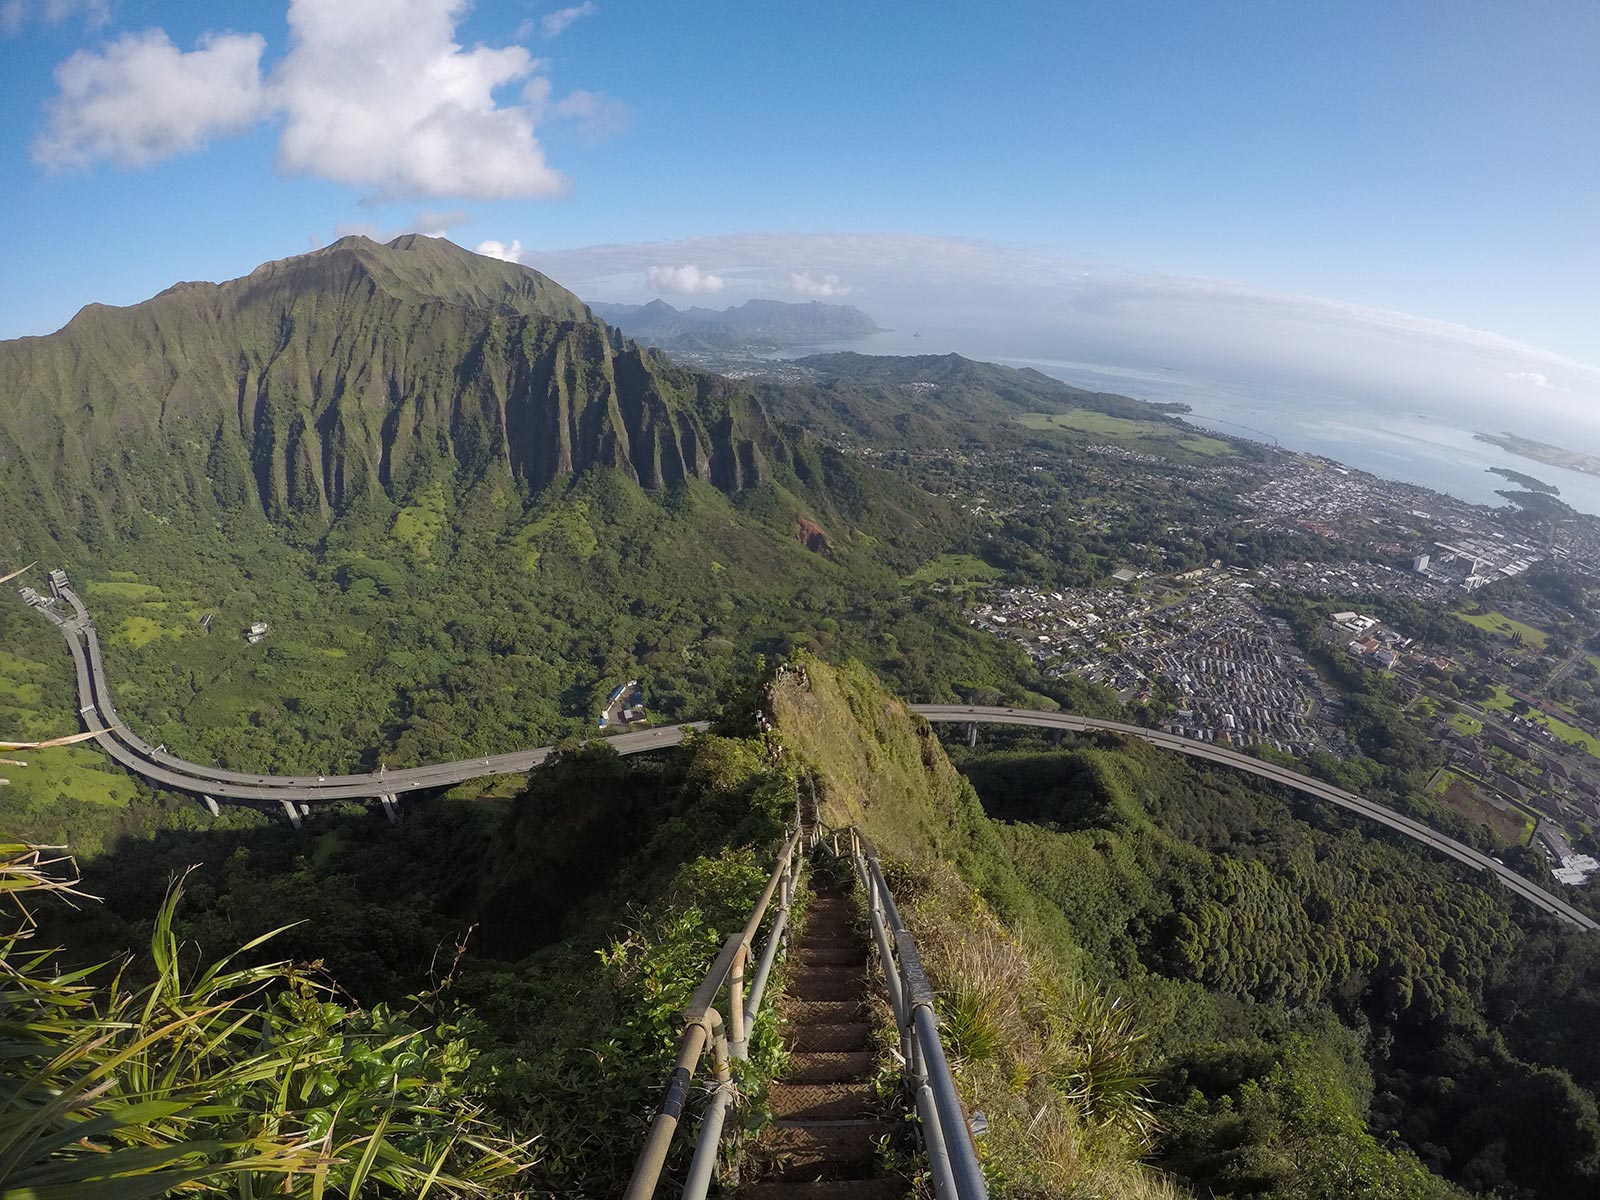 The view from Stairway to Heaven in Oahu, Hawaii. Climbing the stairway to heaven, Hawaii & full guide